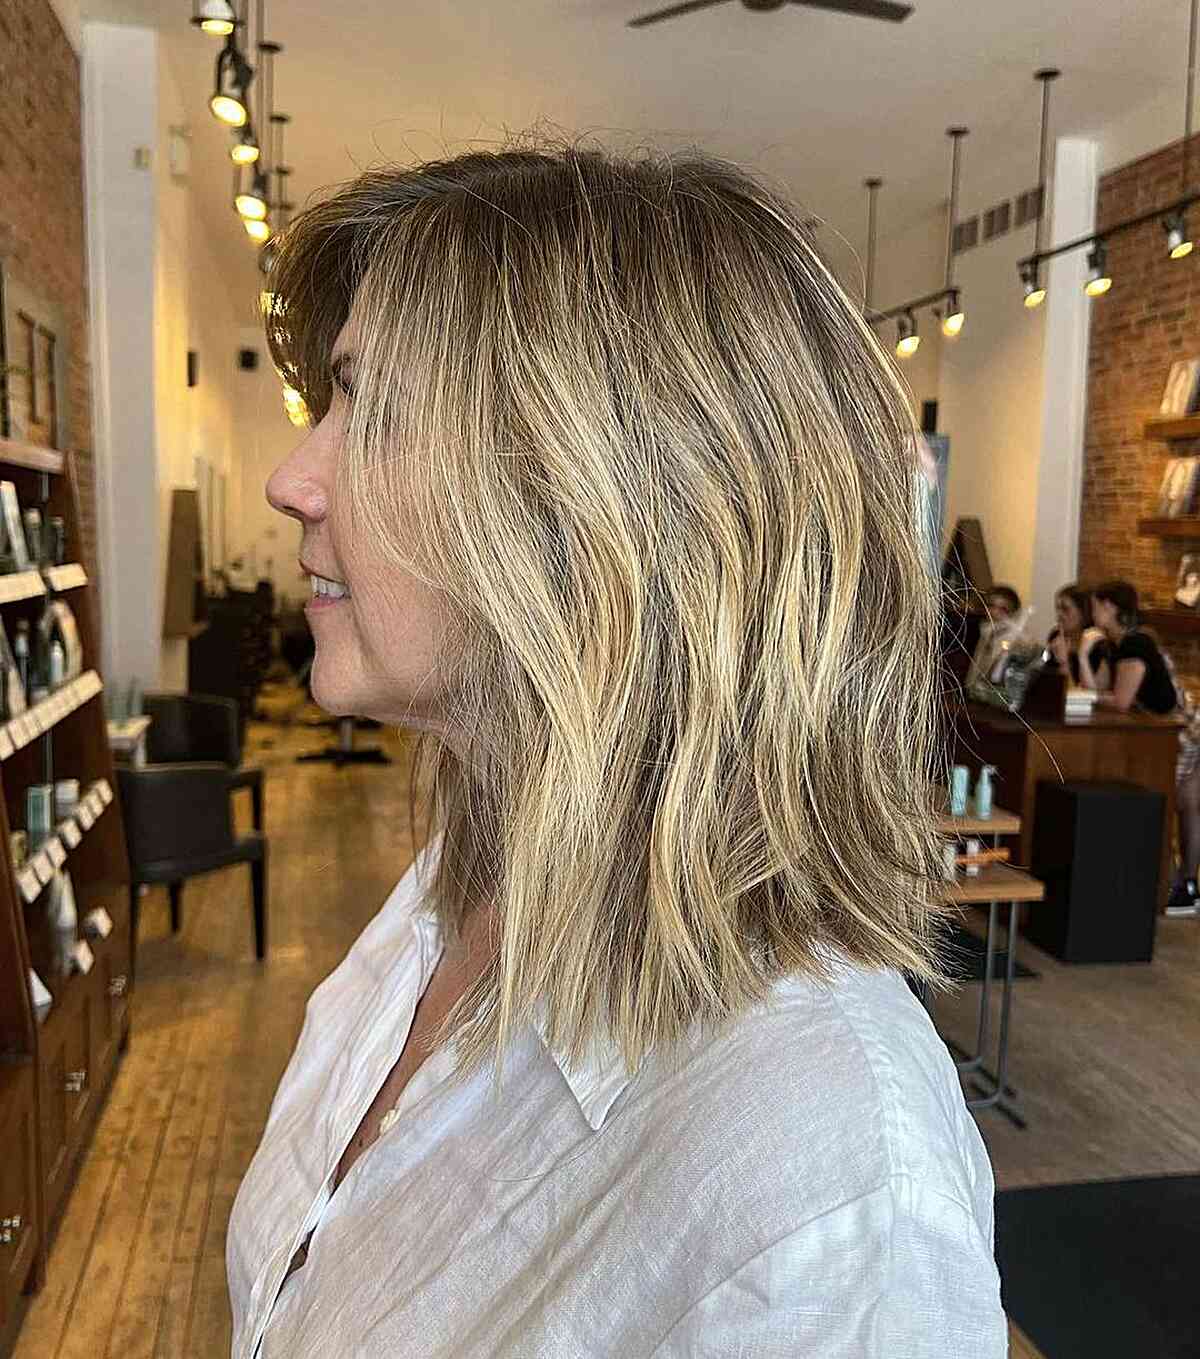 Shoulder-Length Layered Haircut with Texture and Dusted Ends